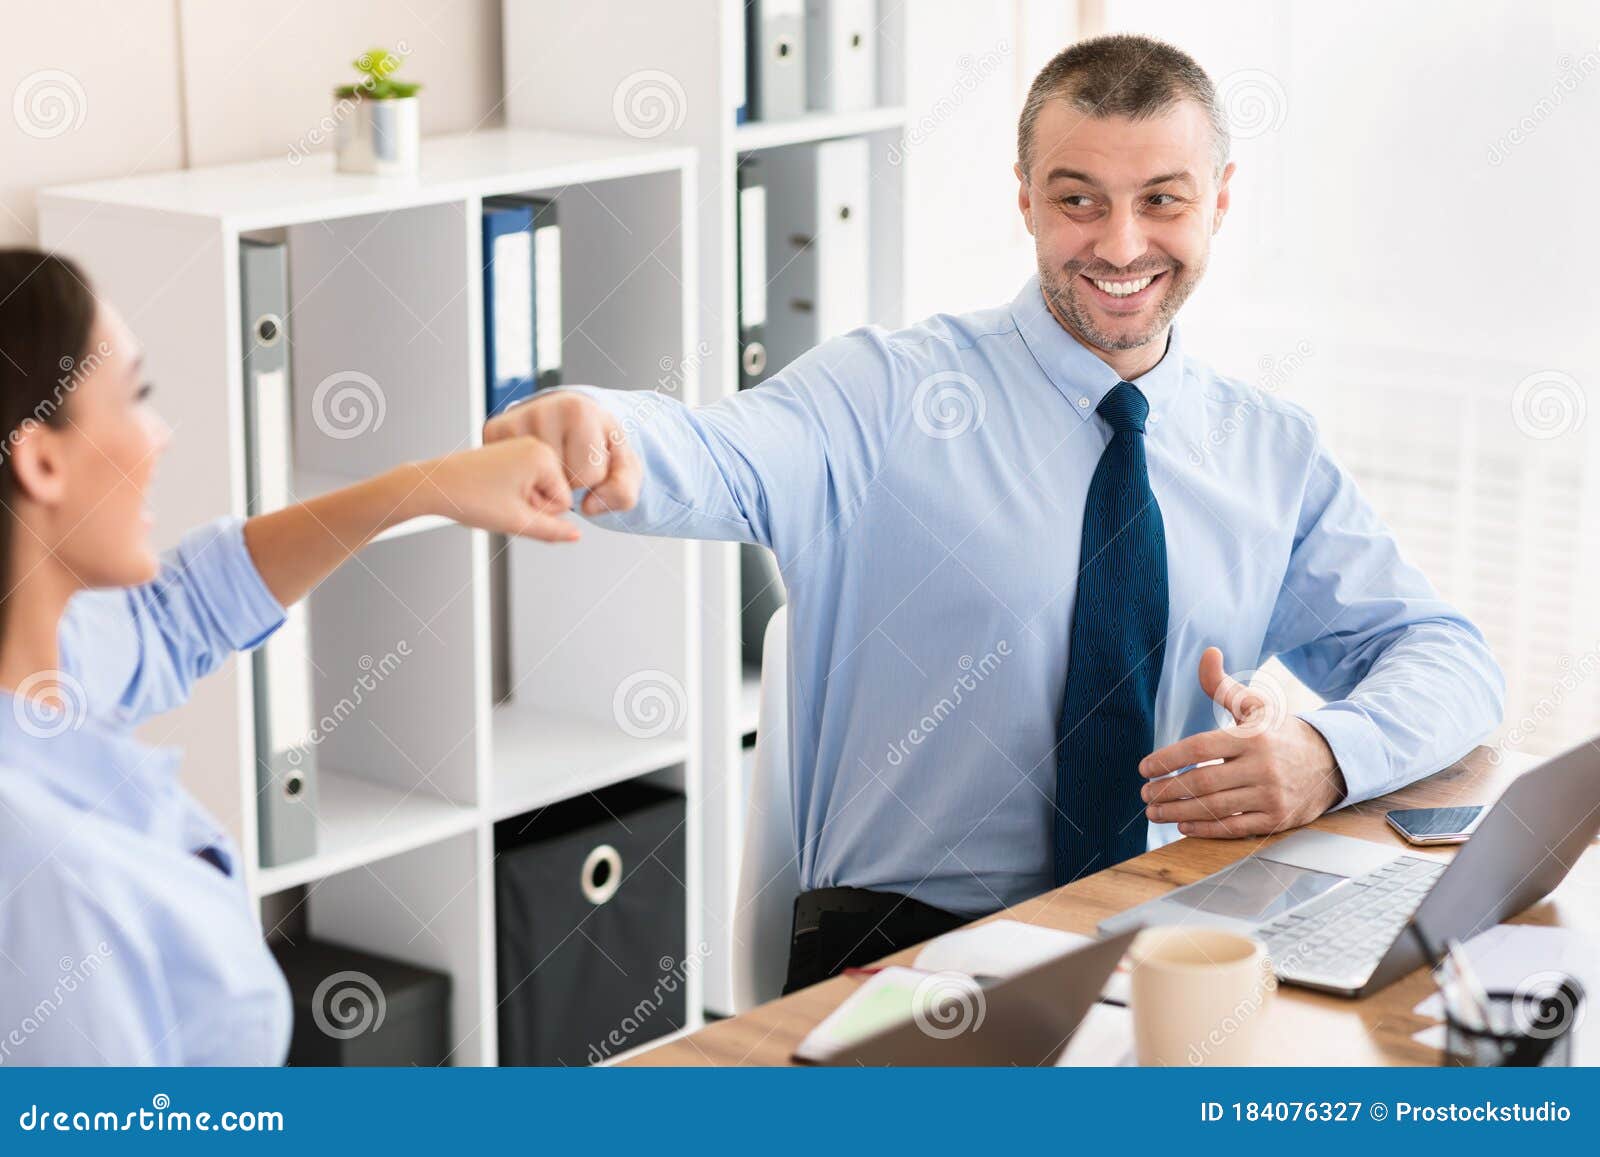 Cheerful Business Coworkers Bumping Fists Celebrating Success Sitting In Office Stock Image 